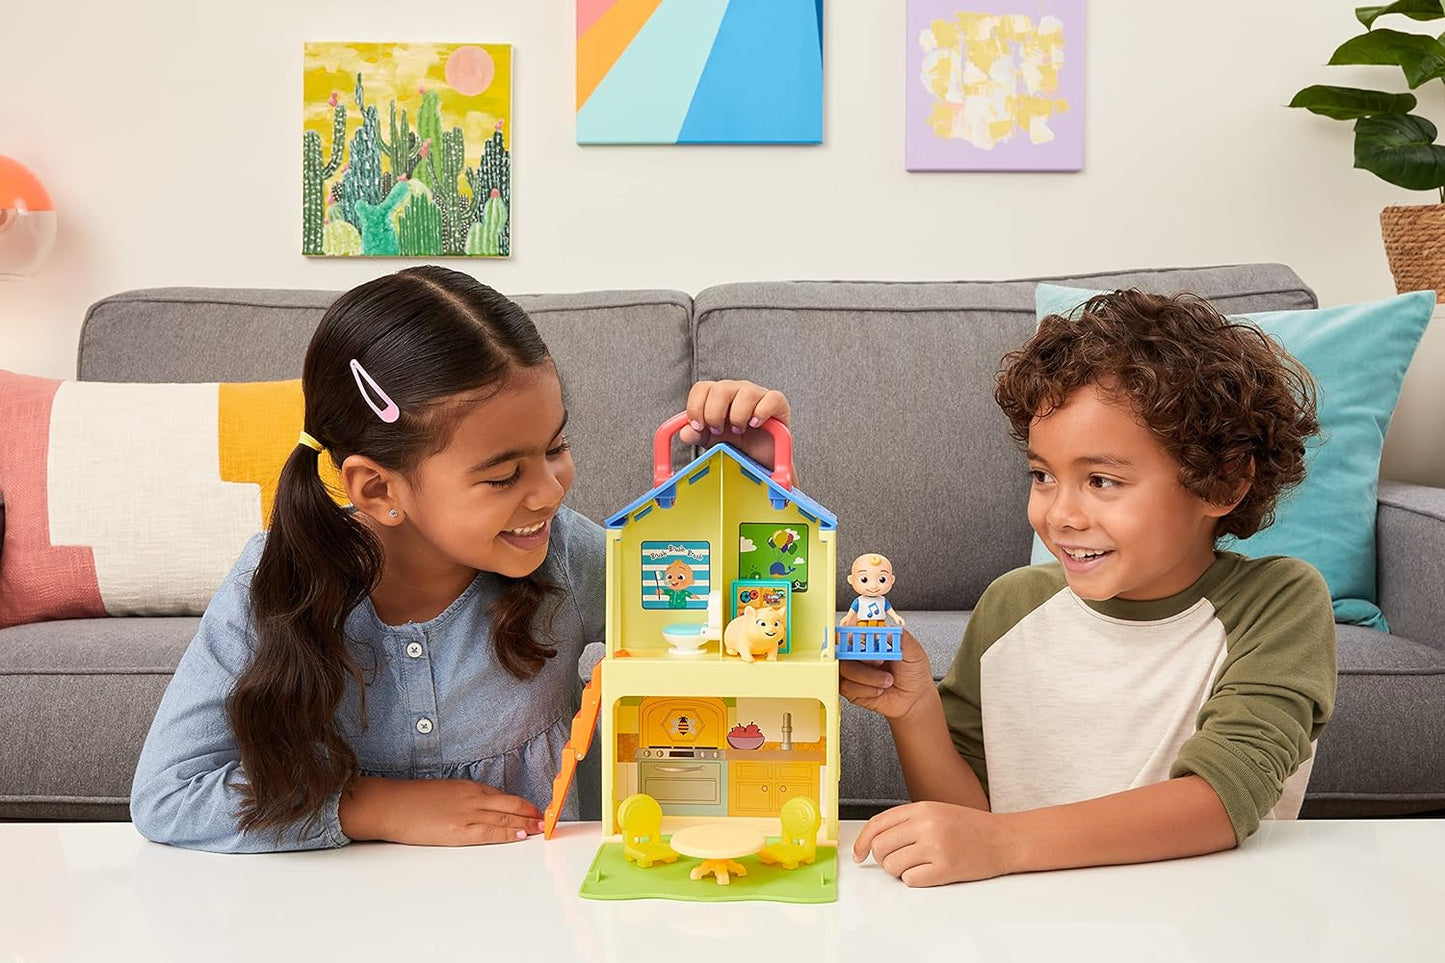 CoComelon Deluxe Pop n' Play House - Transforming Playset - Features JJ, JJ’s Dad, Bingo The Puppy, and Home Accessories – Toys for Kids, Toddlers, and Preschoolers